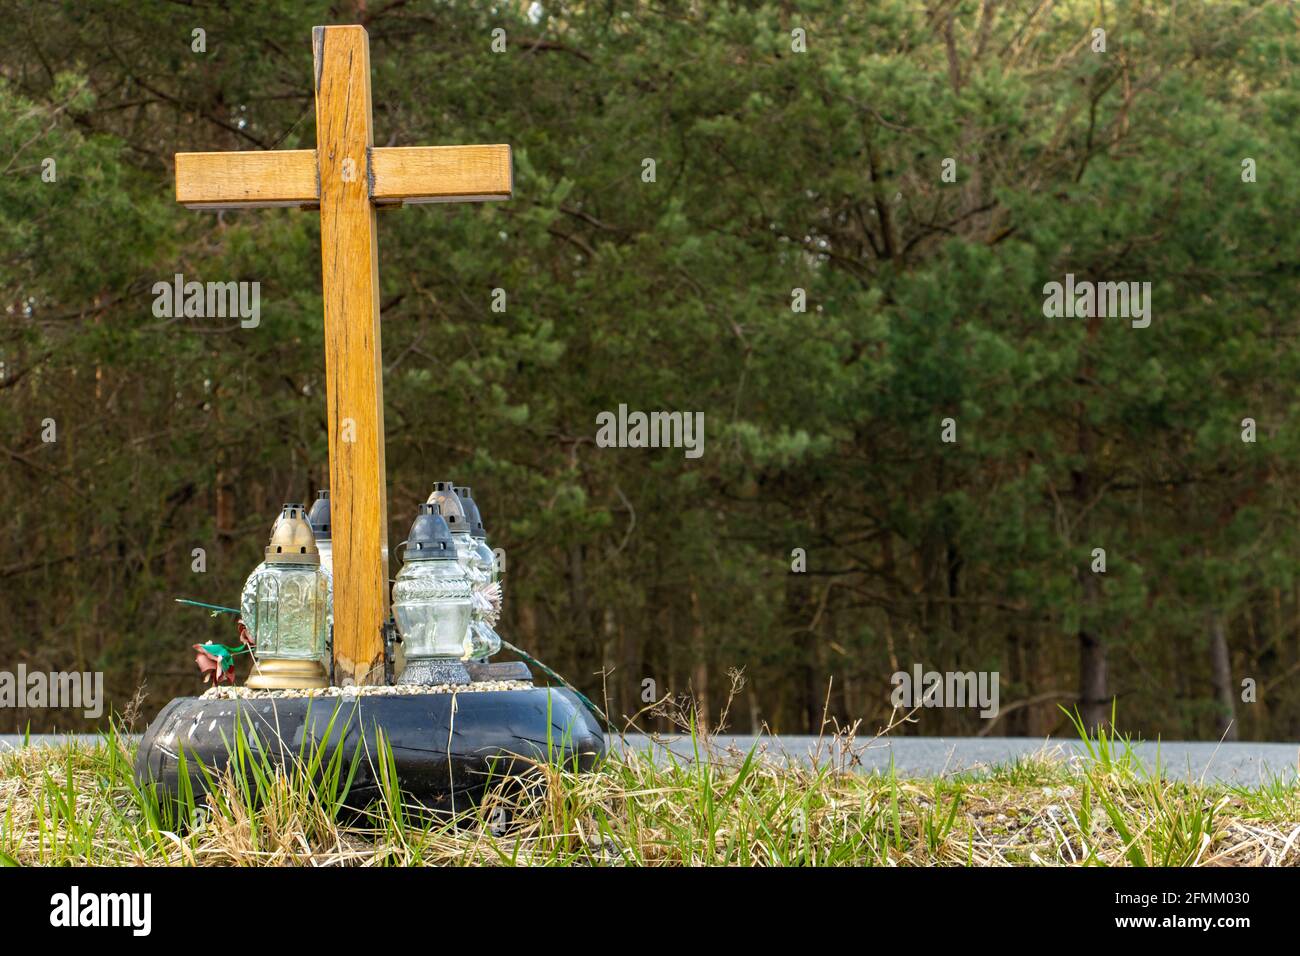 A roadside memorial cross with a candles commemorating the tragic death beside a road. Stock Photo